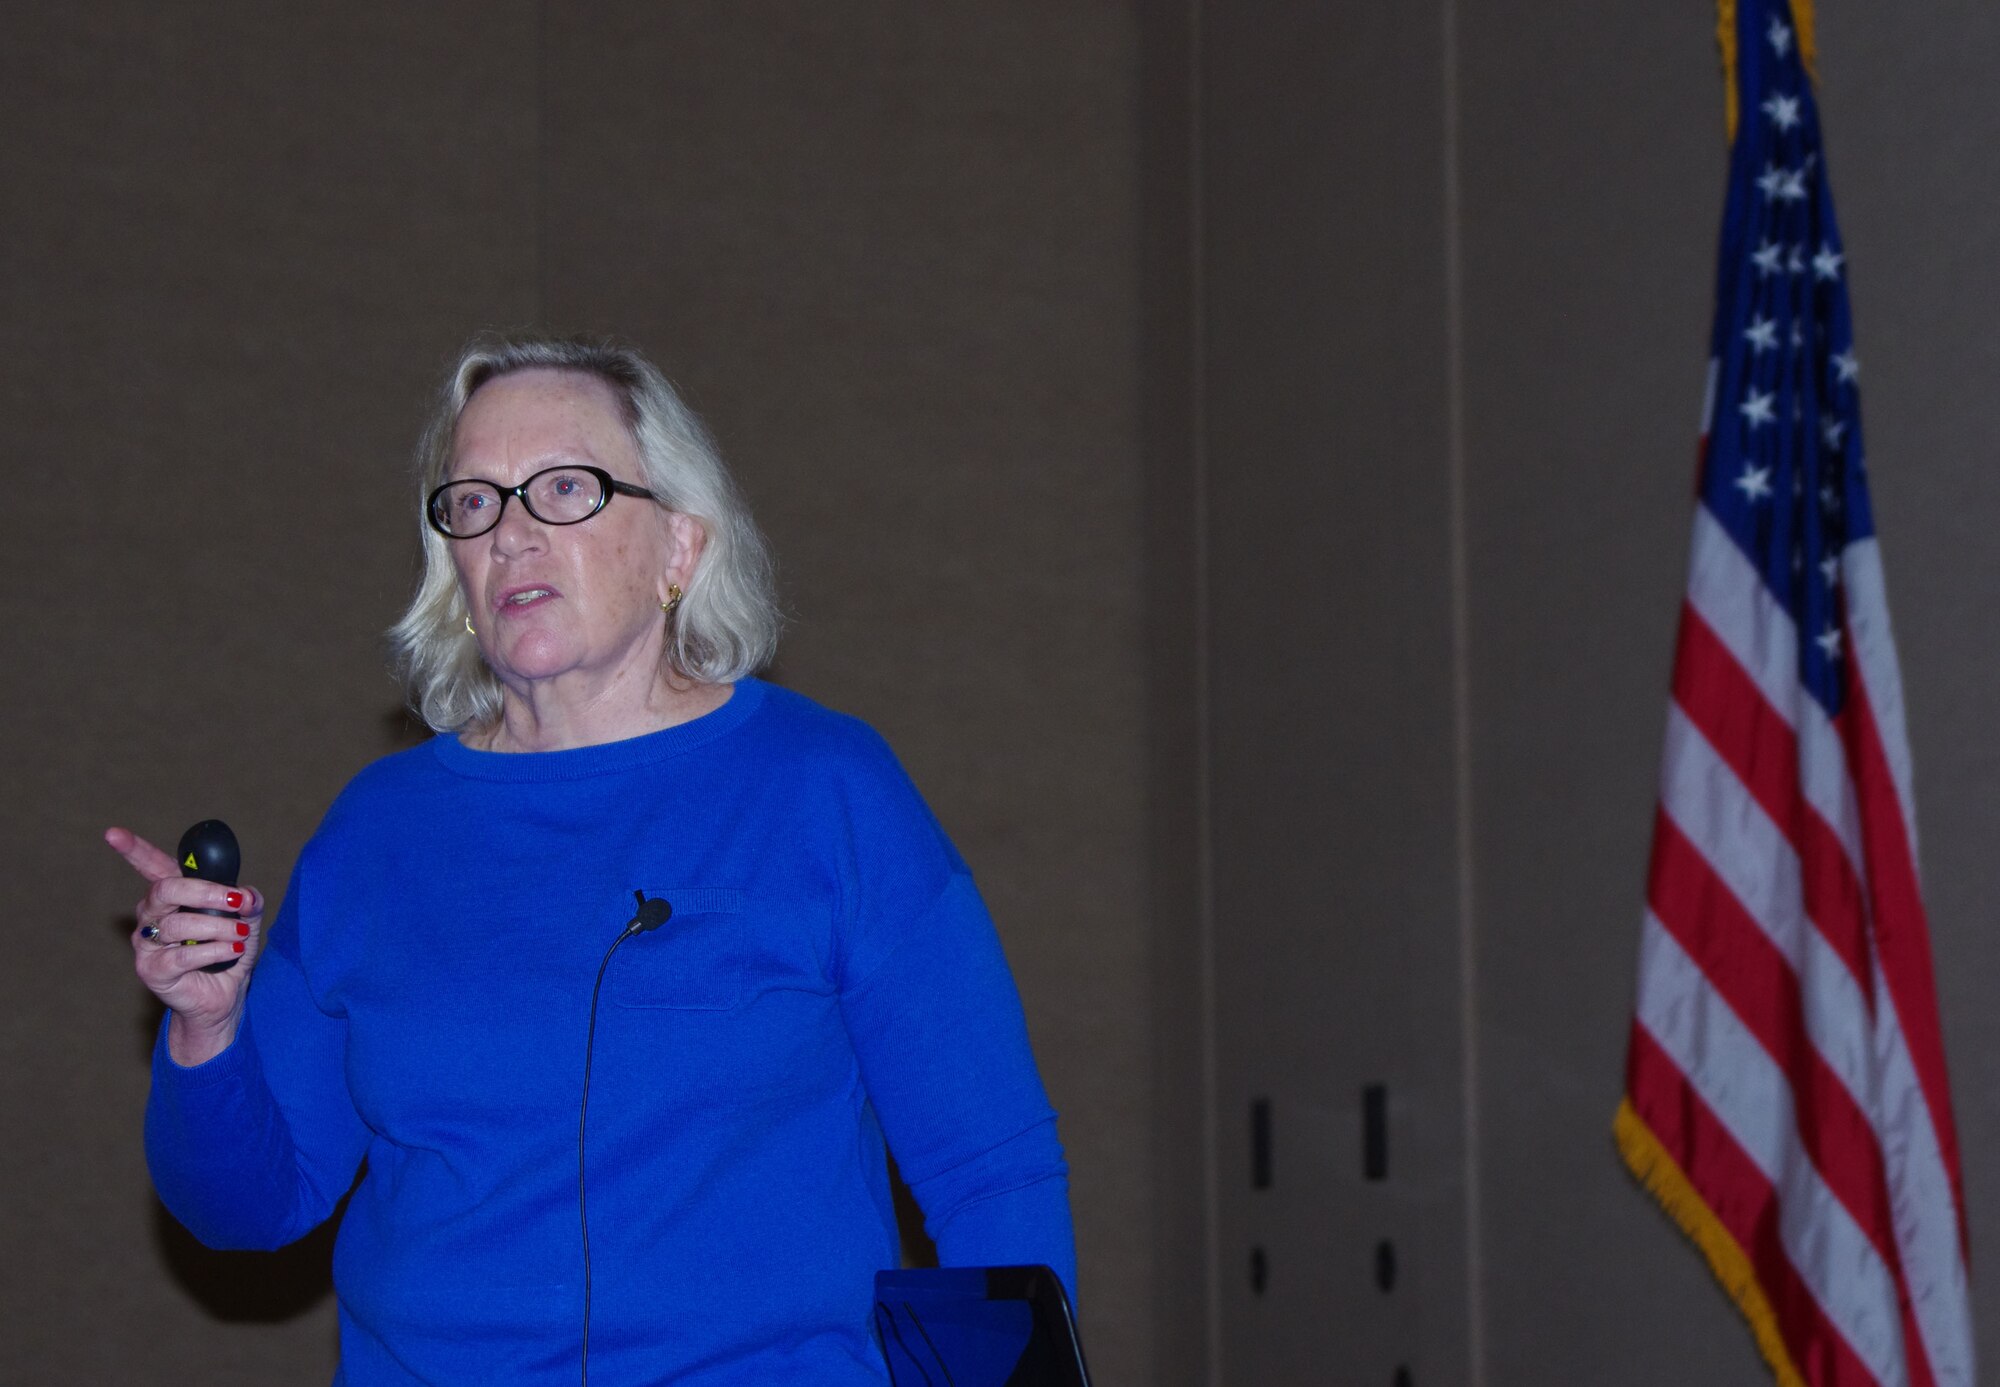 Key Note Speaker, Ann McCulliss Johnson, discusses behavioral issues and solutions for psychological problems military members might face after returning from deployment during a Yellow Ribbon Reintegration Program event in Bend Ore., Jan. 24, 2015. The Yellow Ribbon Reintegration Program provides deployment support and reintegration services to all service members, and their families, enabling them to sustain the rigors associated with deployment or mobilization. (U.S. Air National Guard photos by Tech. Sgt. Aaron Perkins, 142nd Fighter Wing Public Affairs/Released)